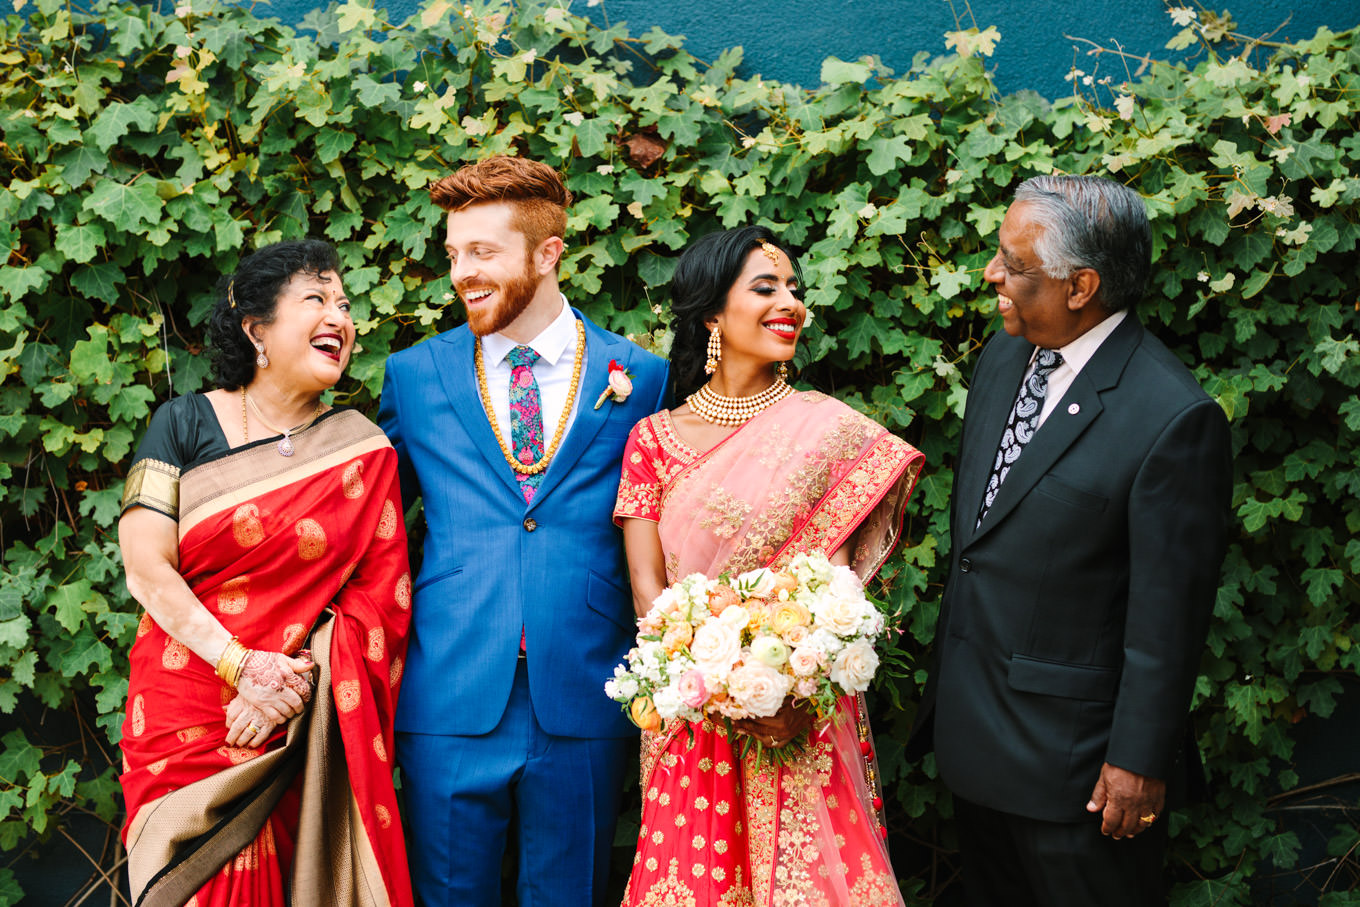 Laughing family portrait. Two Disney artists create a unique and colorful Indian Fusion wedding at The Fig House Los Angeles, featured on Green Wedding Shoes. | Colorful and elevated wedding inspiration for fun-loving couples in Southern California | #indianwedding #indianfusionwedding #thefighouse #losangeleswedding   Source: Mary Costa Photography | Los Angeles